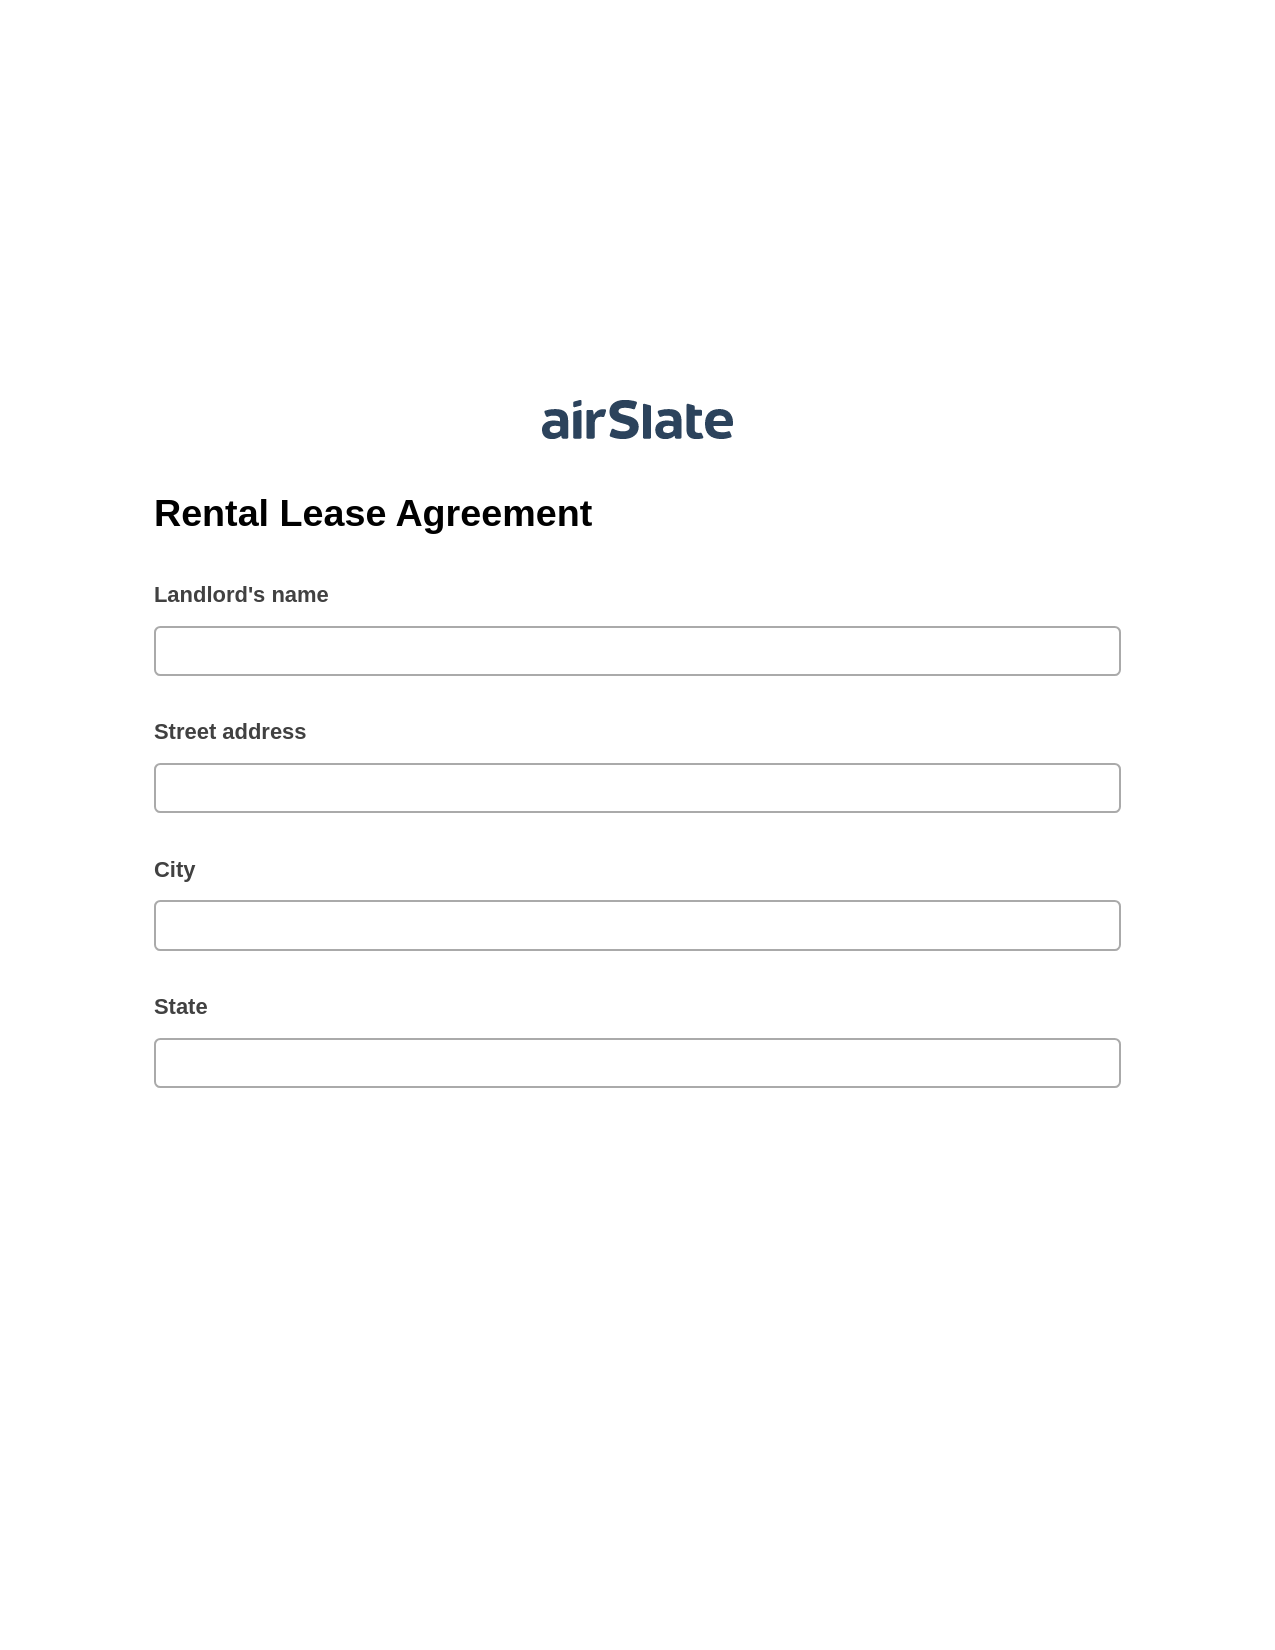 Rental Lease Agreement Pre-fill Dropdown from Airtable, Invoke Salesforce Process Bot, Webhook Postfinish Bot